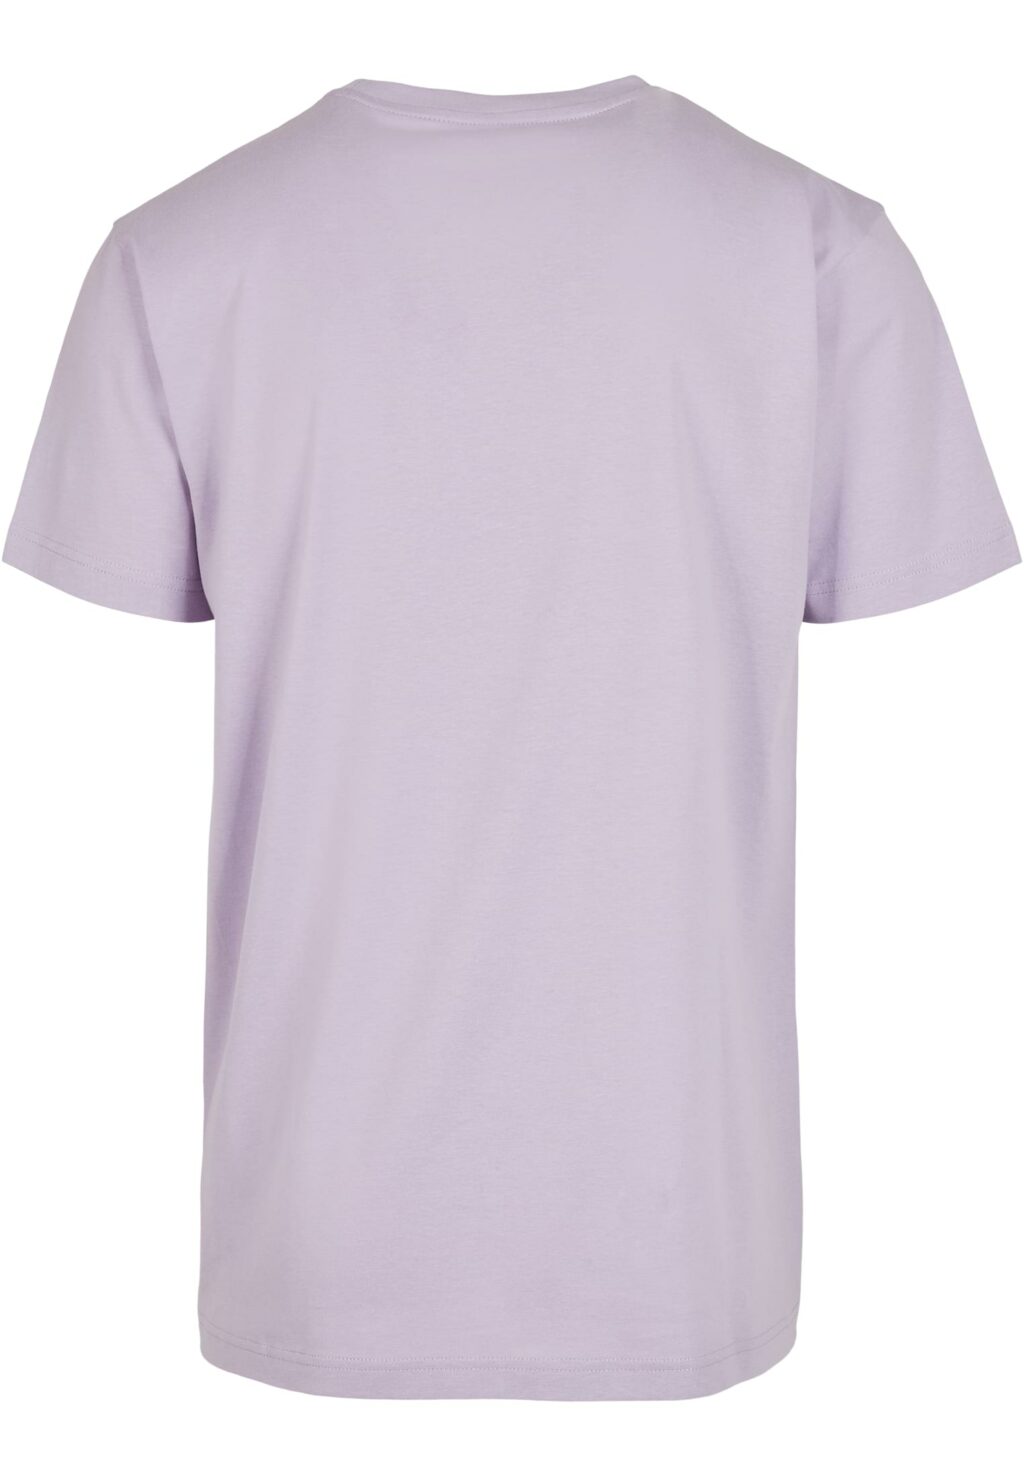 Space Fam Tee lilac MT2800